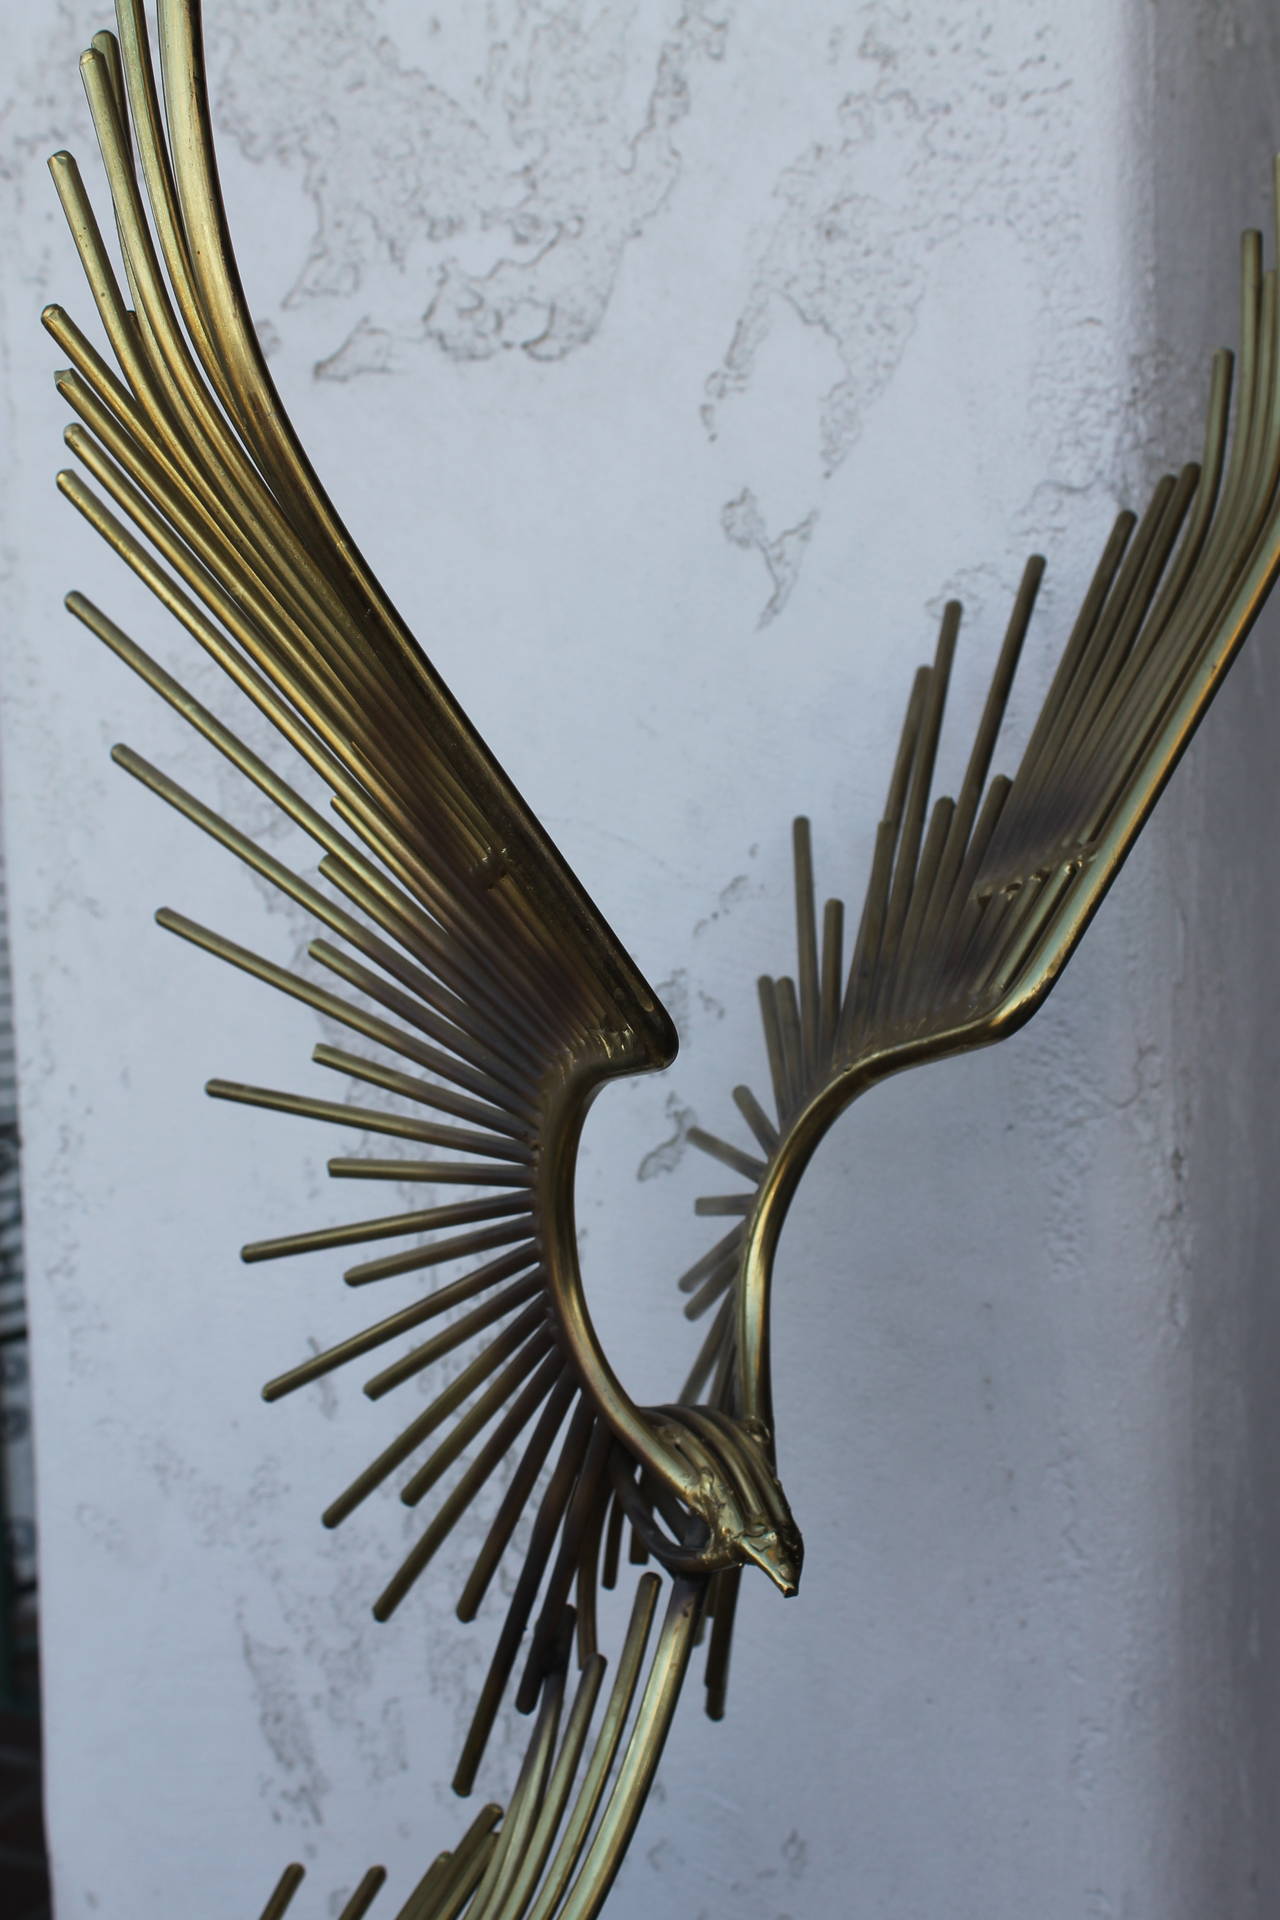 Monumental brass plated steel sculpture by Curtis Jere titled Eagles in Flight.  From the “Eagles in Flight